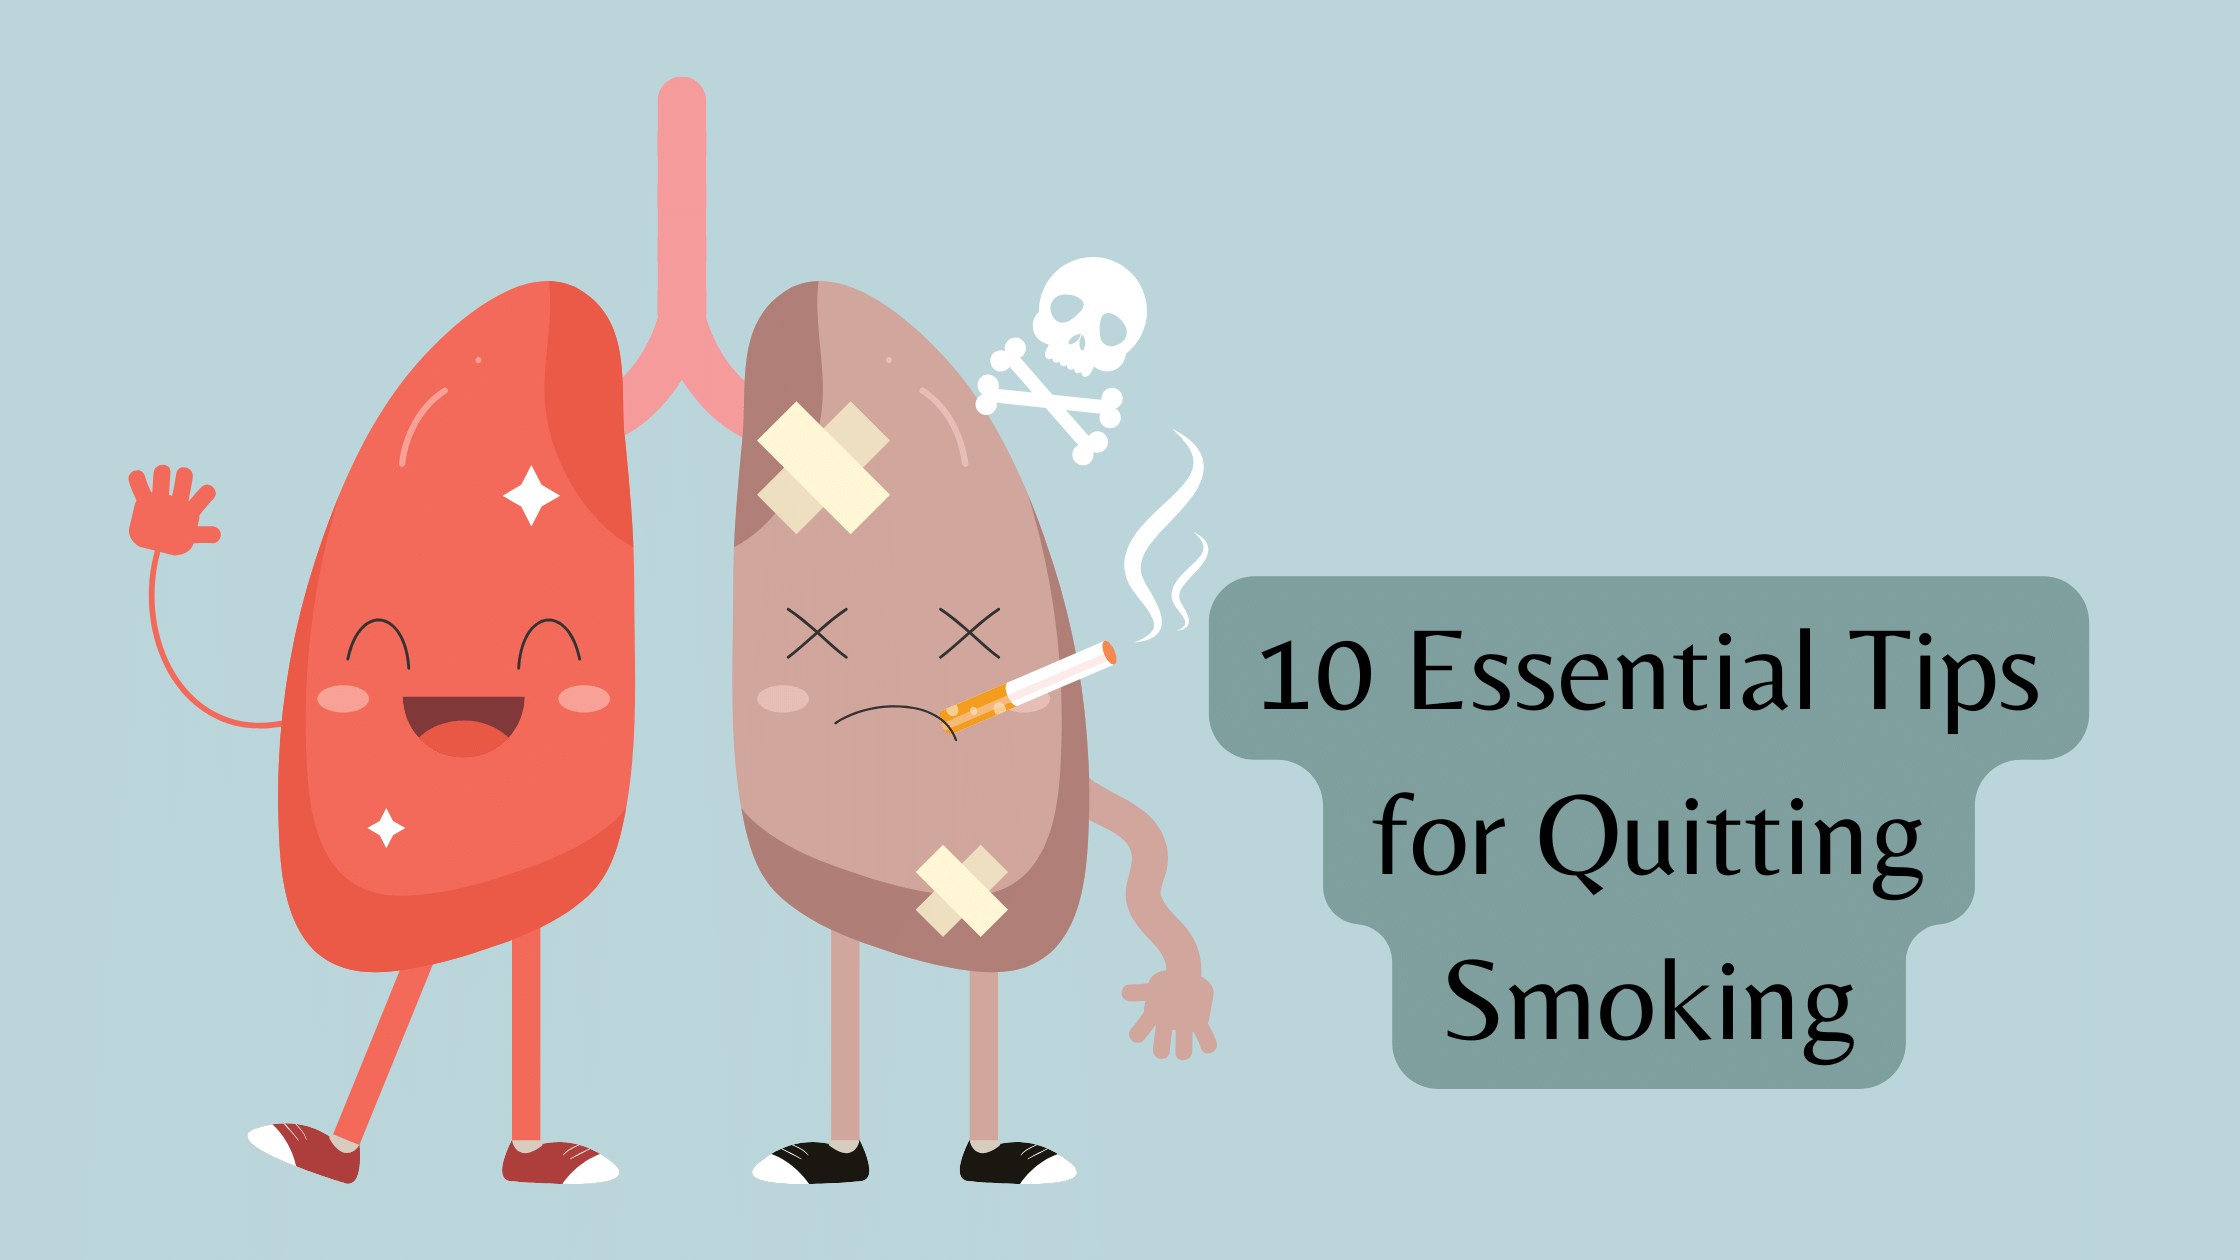 Essential Tips for Quitting Smoking